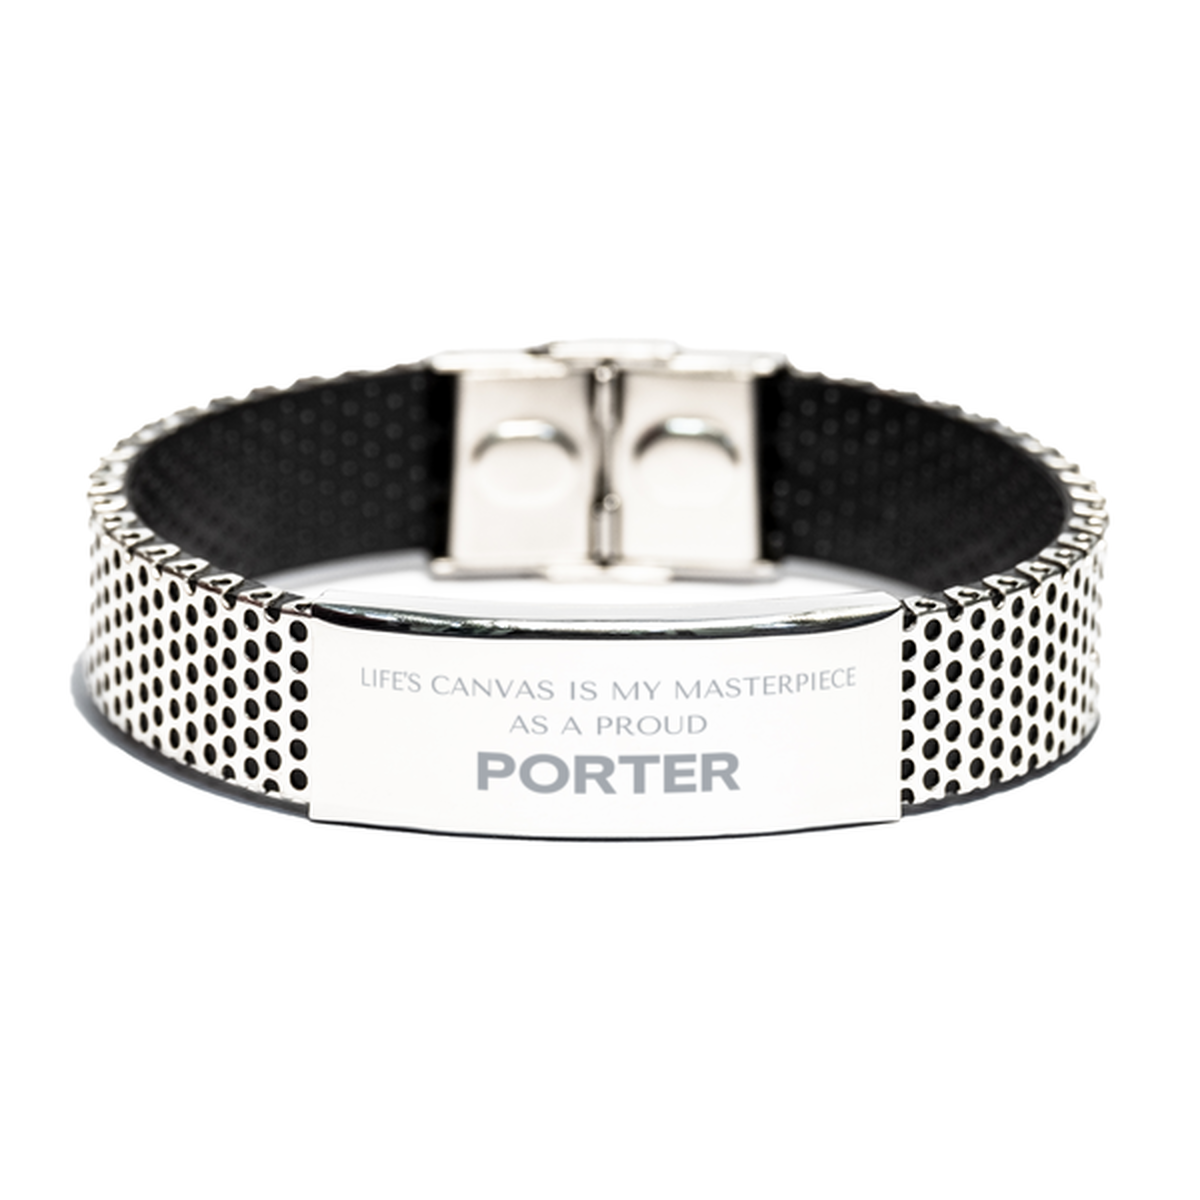 Proud Porter Gifts, Life's canvas is my masterpiece, Epic Birthday Christmas Unique Stainless Steel Bracelet For Porter, Coworkers, Men, Women, Friends